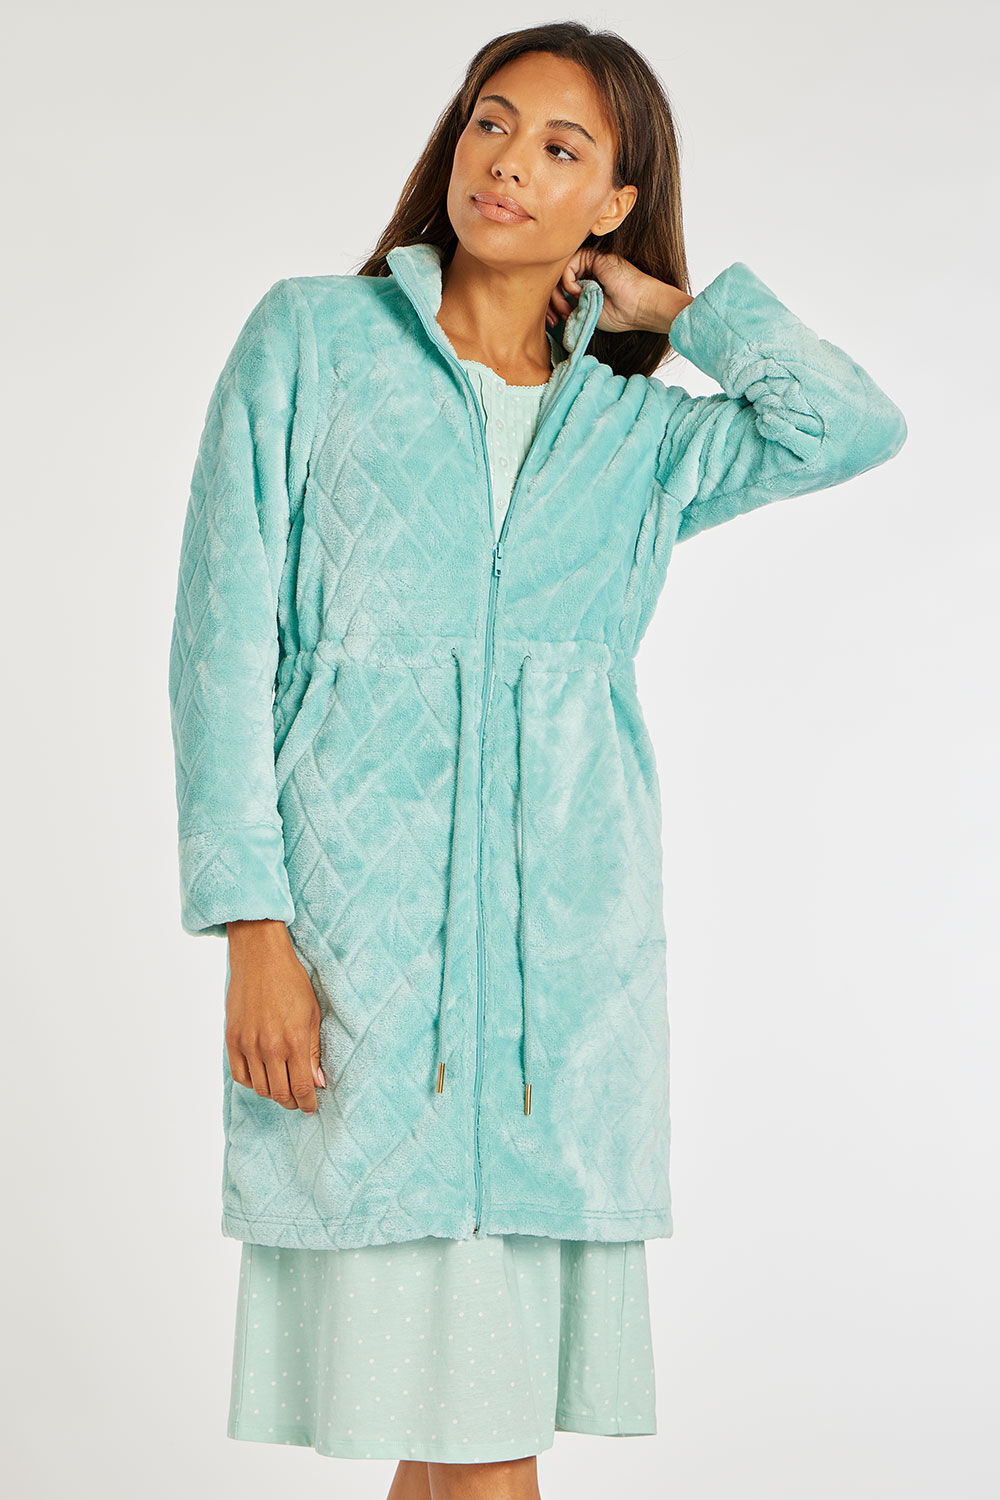 Richie House Dressing Gown Ladies Zip Up Fleece Collared Robe Lounge C –  Richie House USA